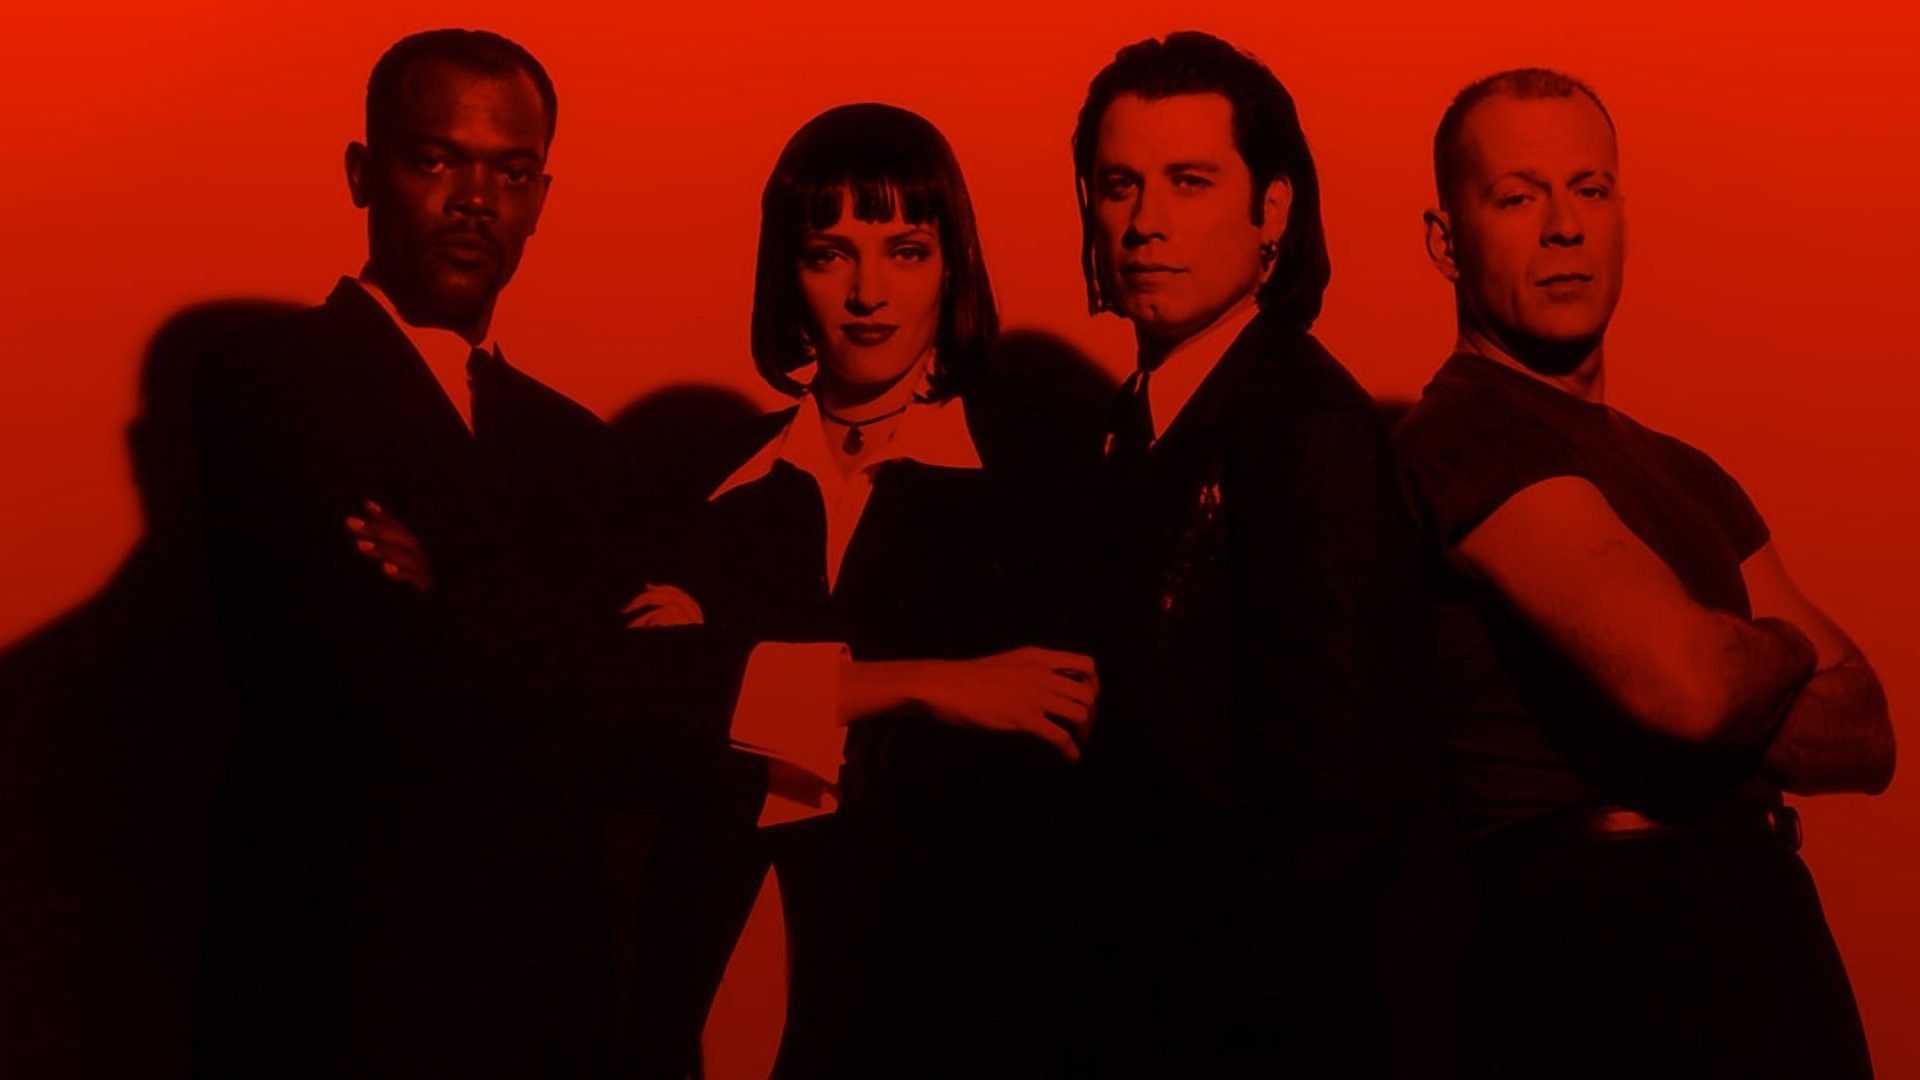 Pulp Fiction Wallpaper Image Photo Picture Background